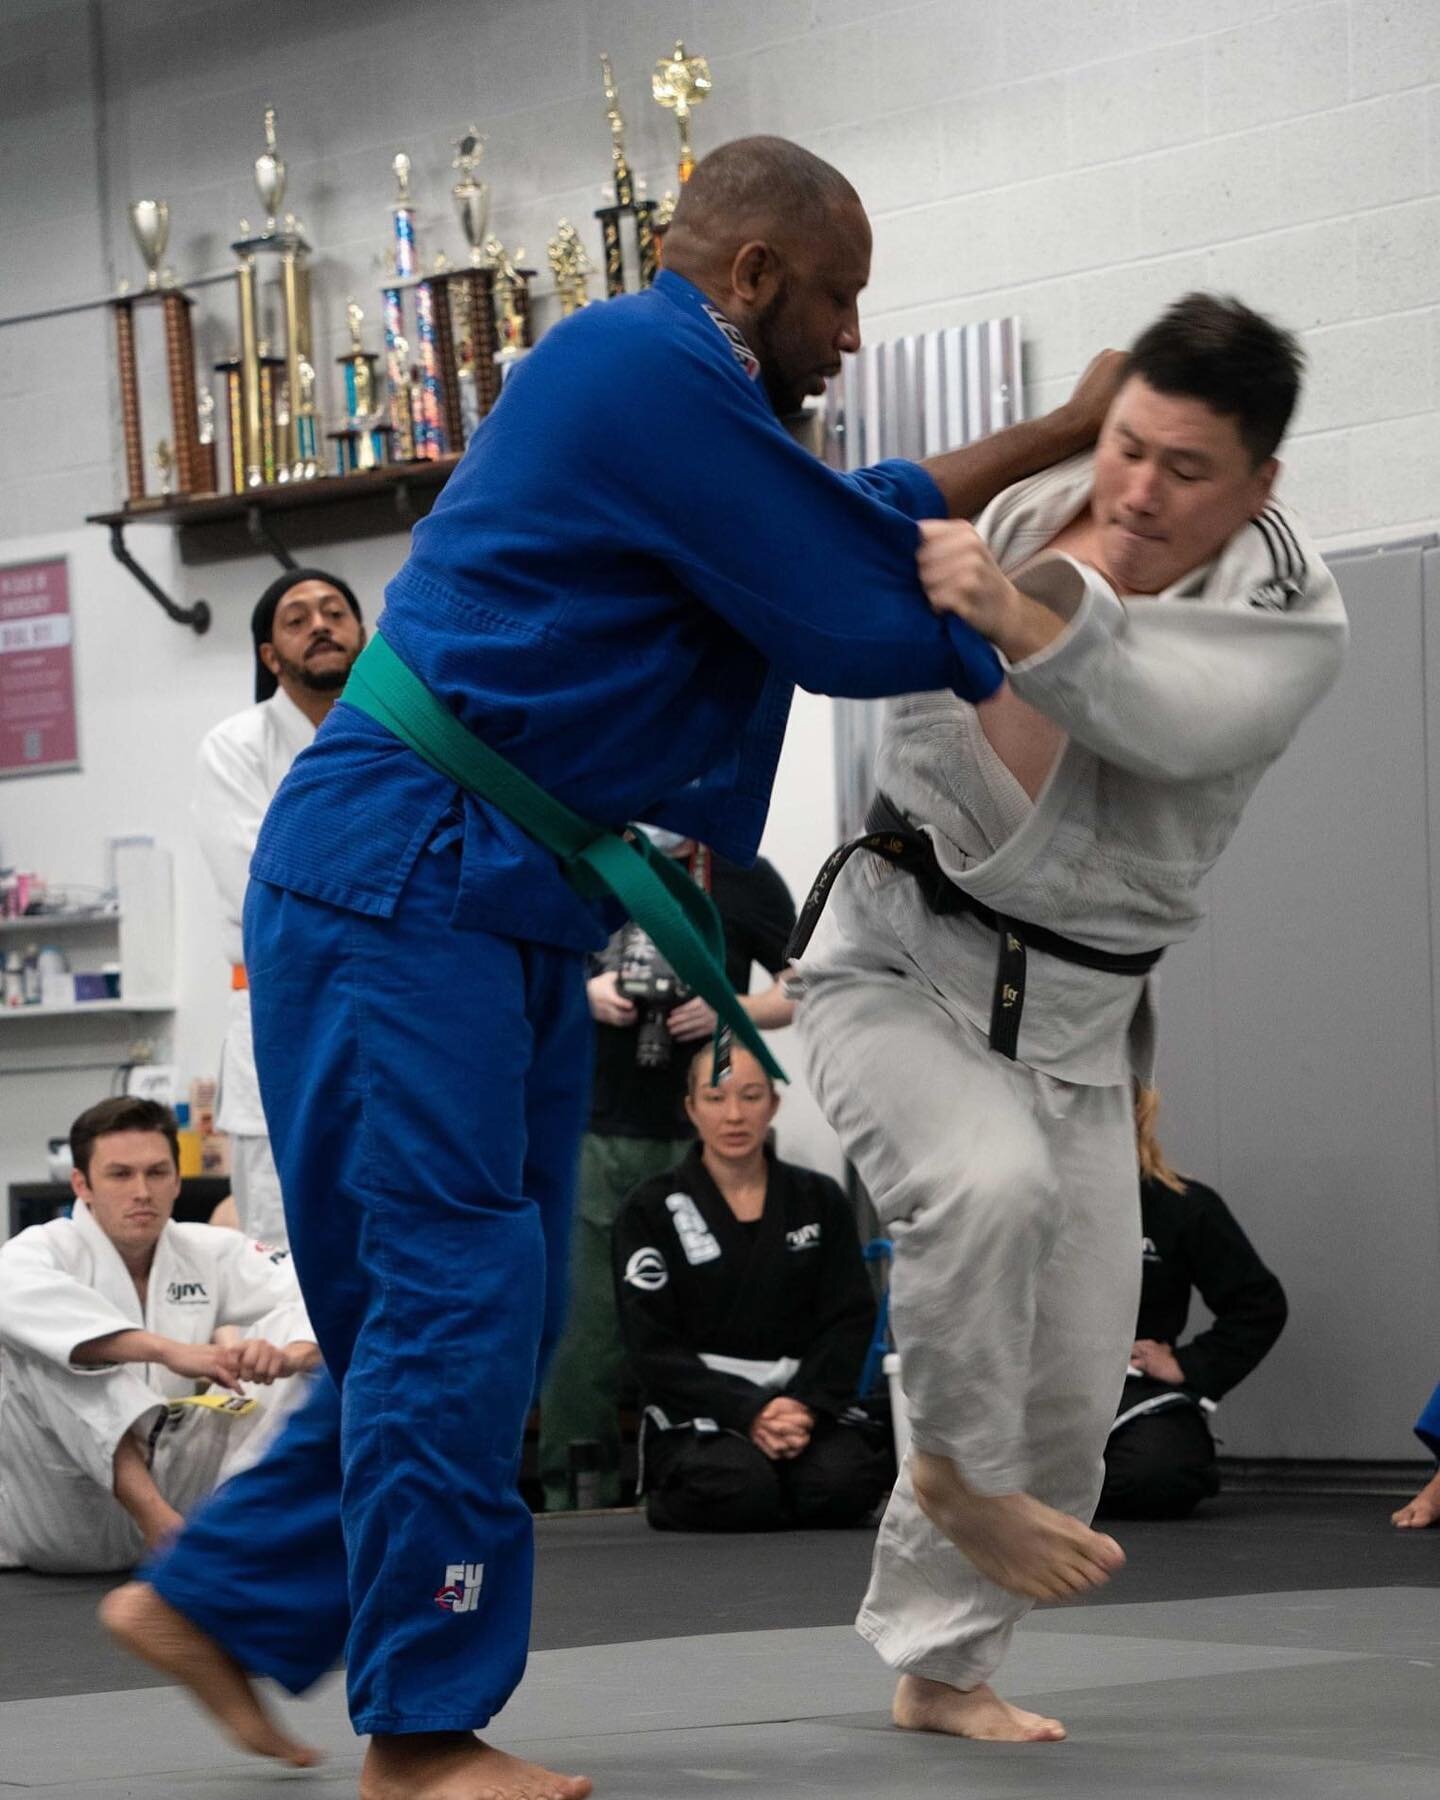 Photos from our In-House Tournament and Grand Reopening last weekend! Special thanks to Cameron Braun for capturing the images 📸 #judo #martialarts #atlanta #randori #judolife #judotraining #osu